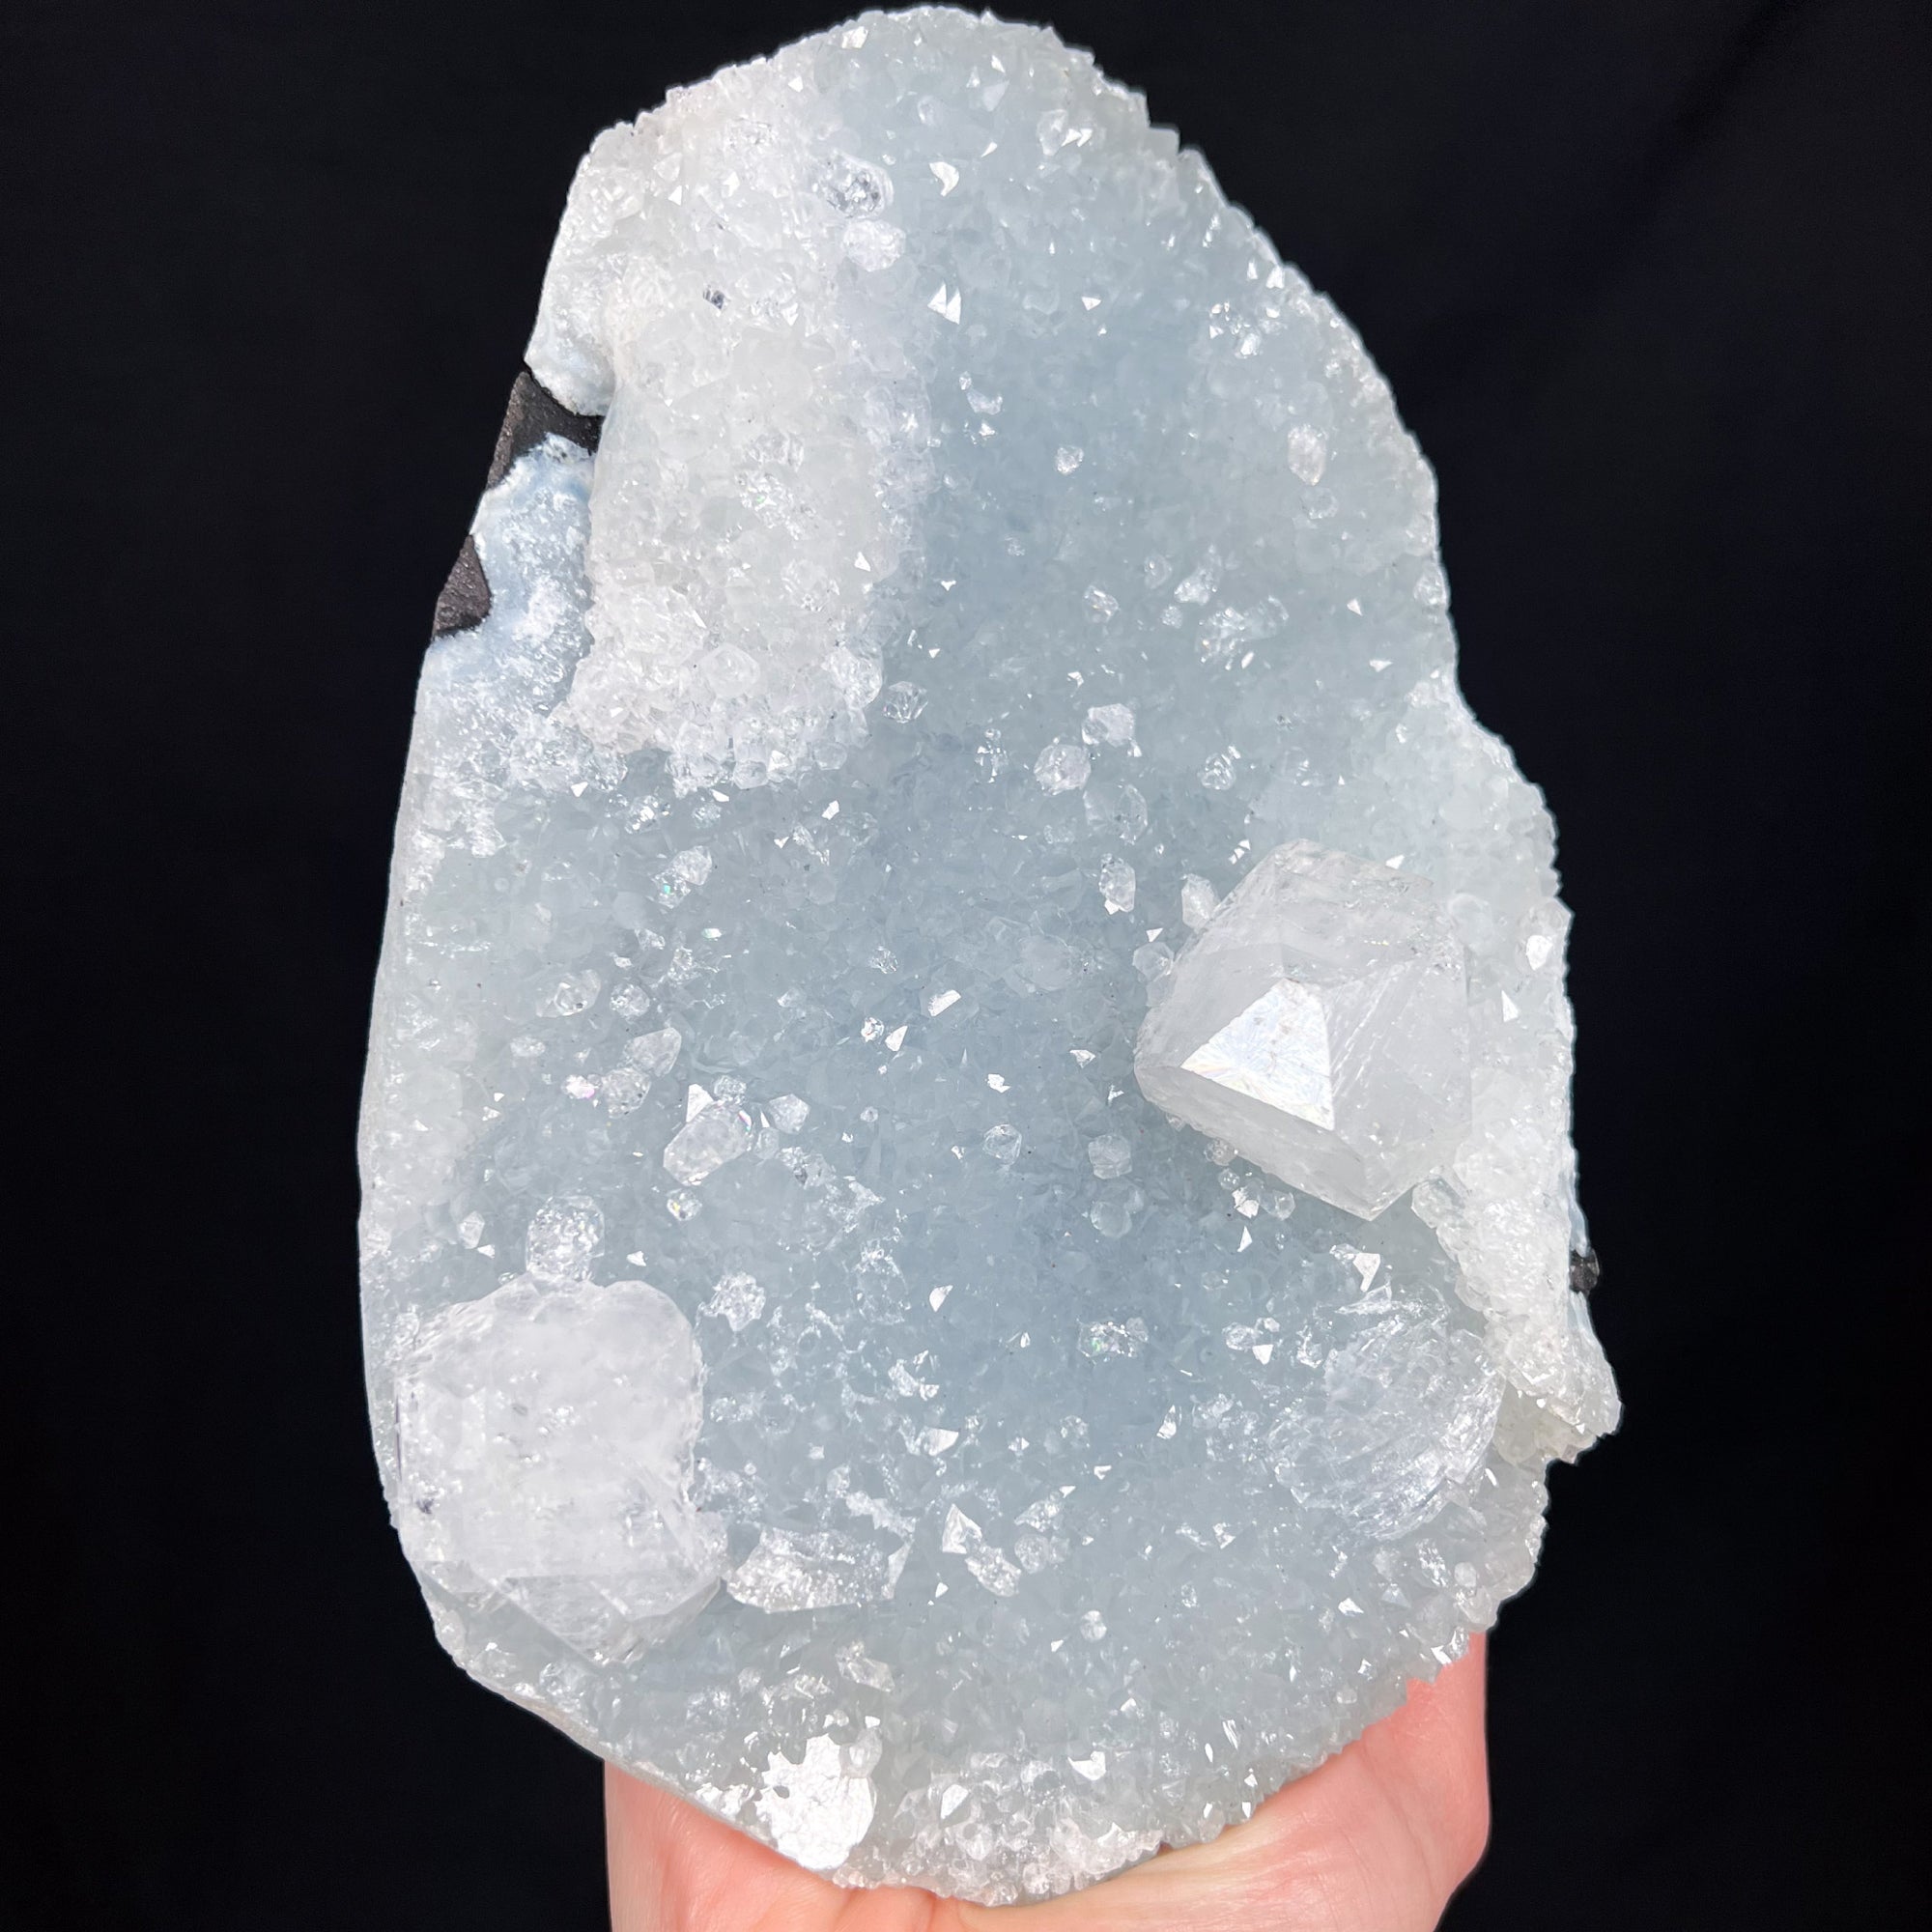 Clear Apophyllite Crystals on a Layer of Quartz and Chalcedony